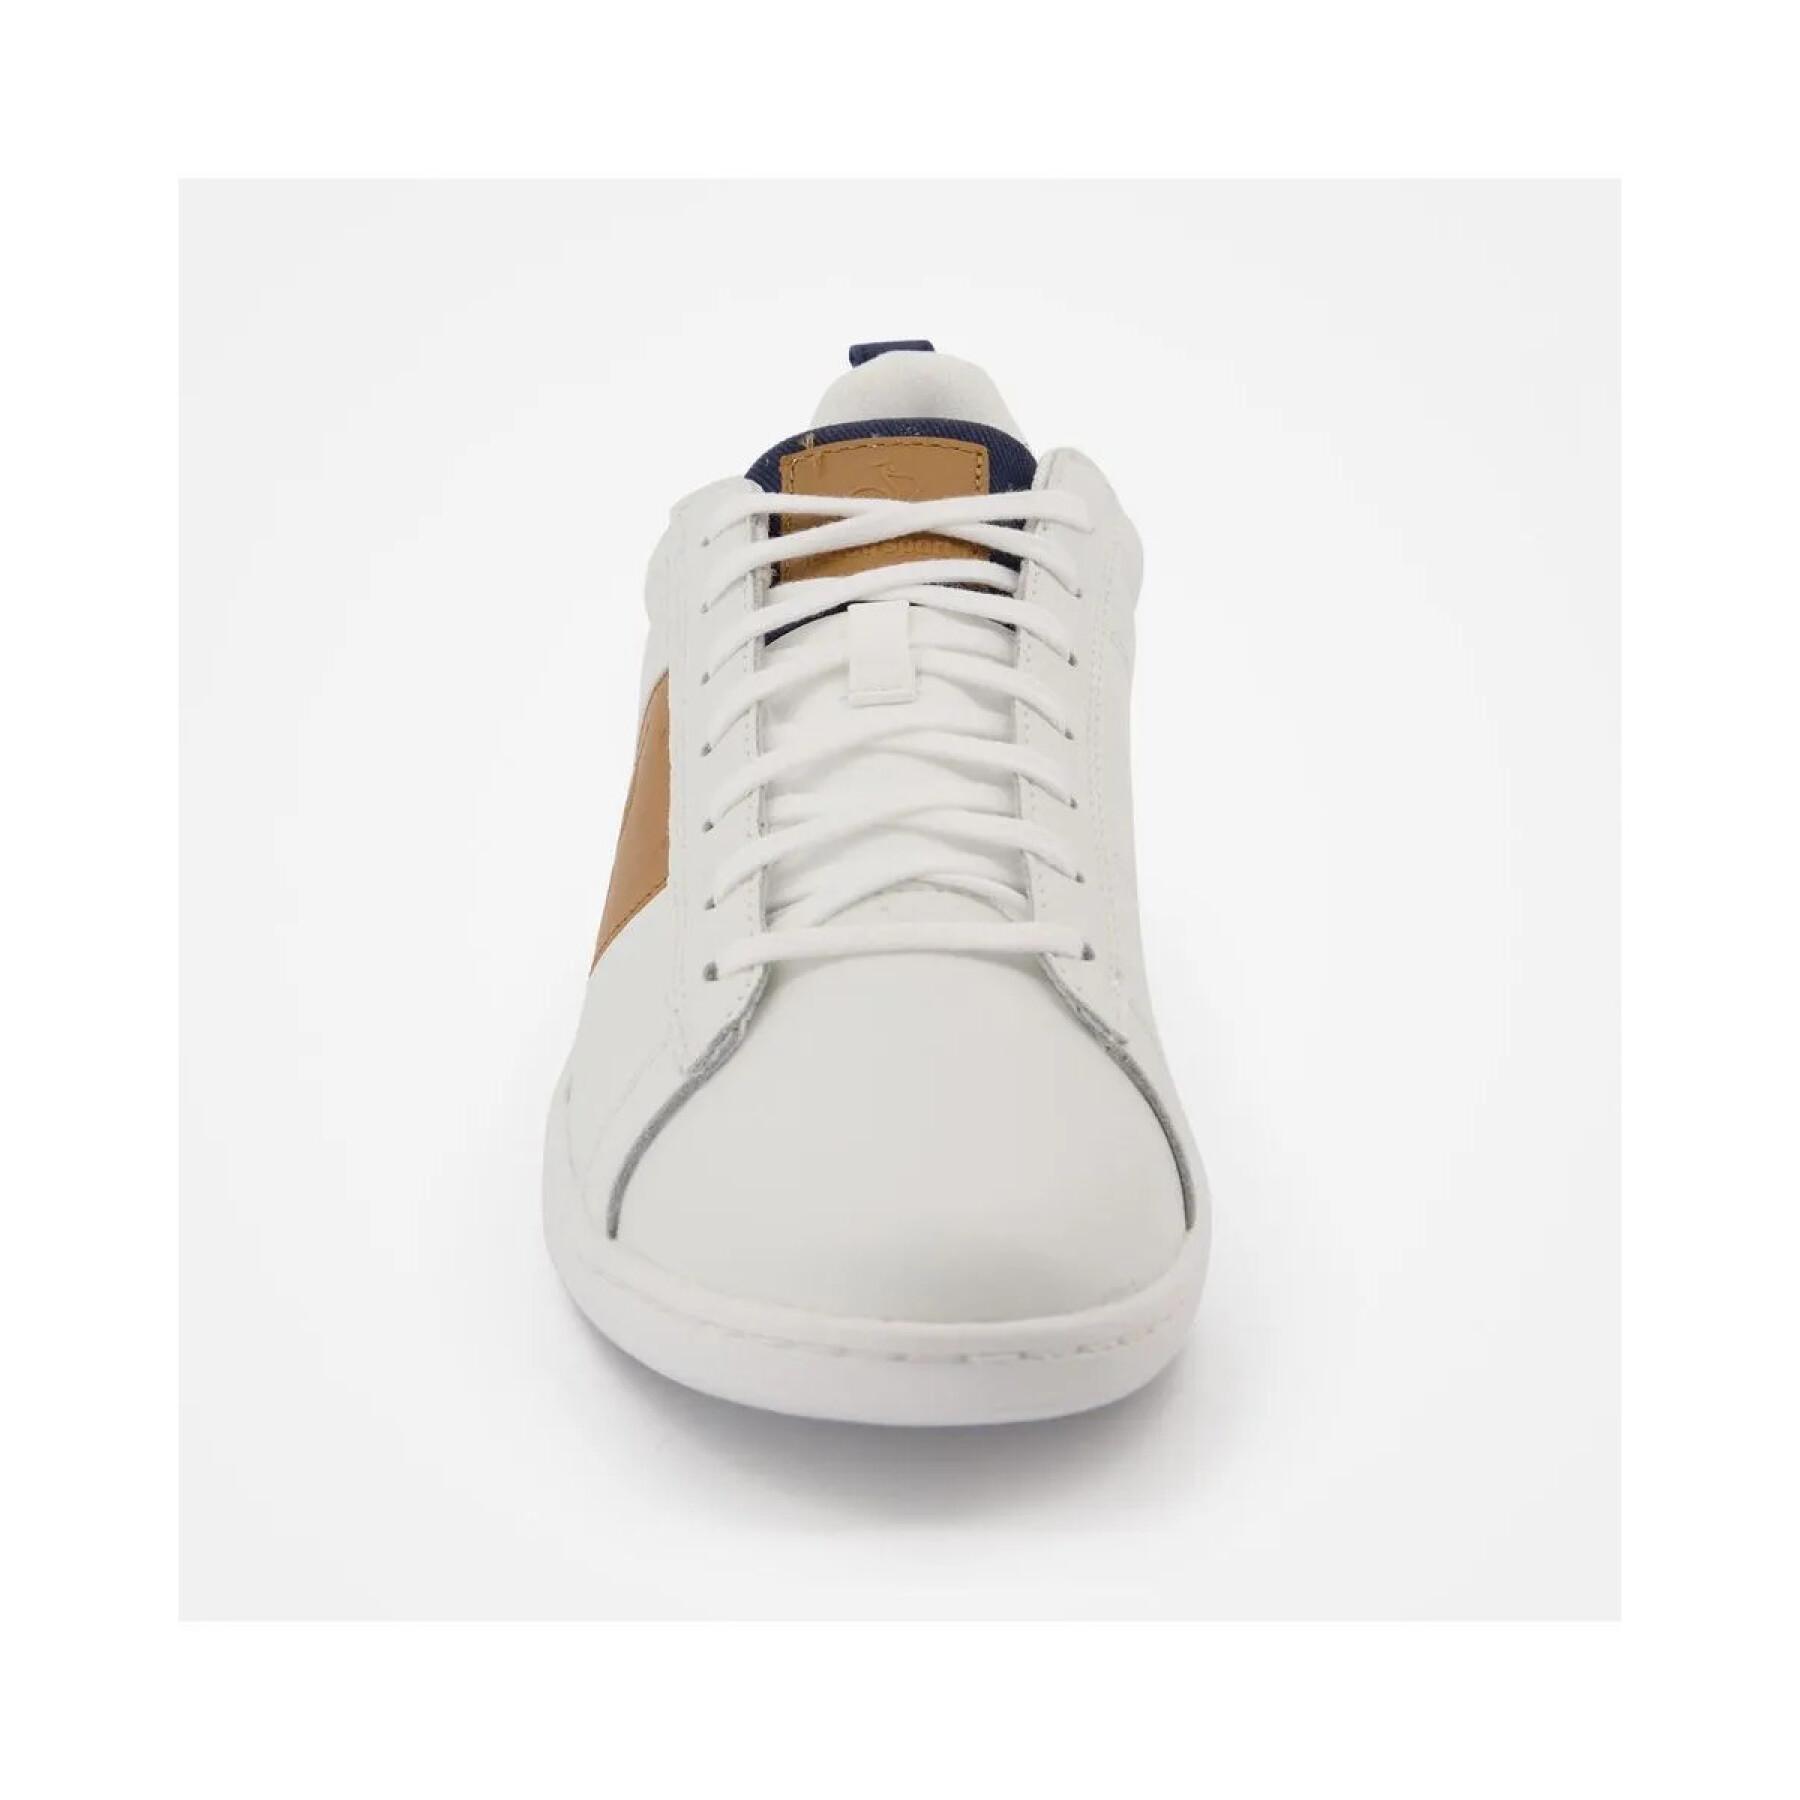 Formadores Le Coq Sportif Courtclassic Twill PS